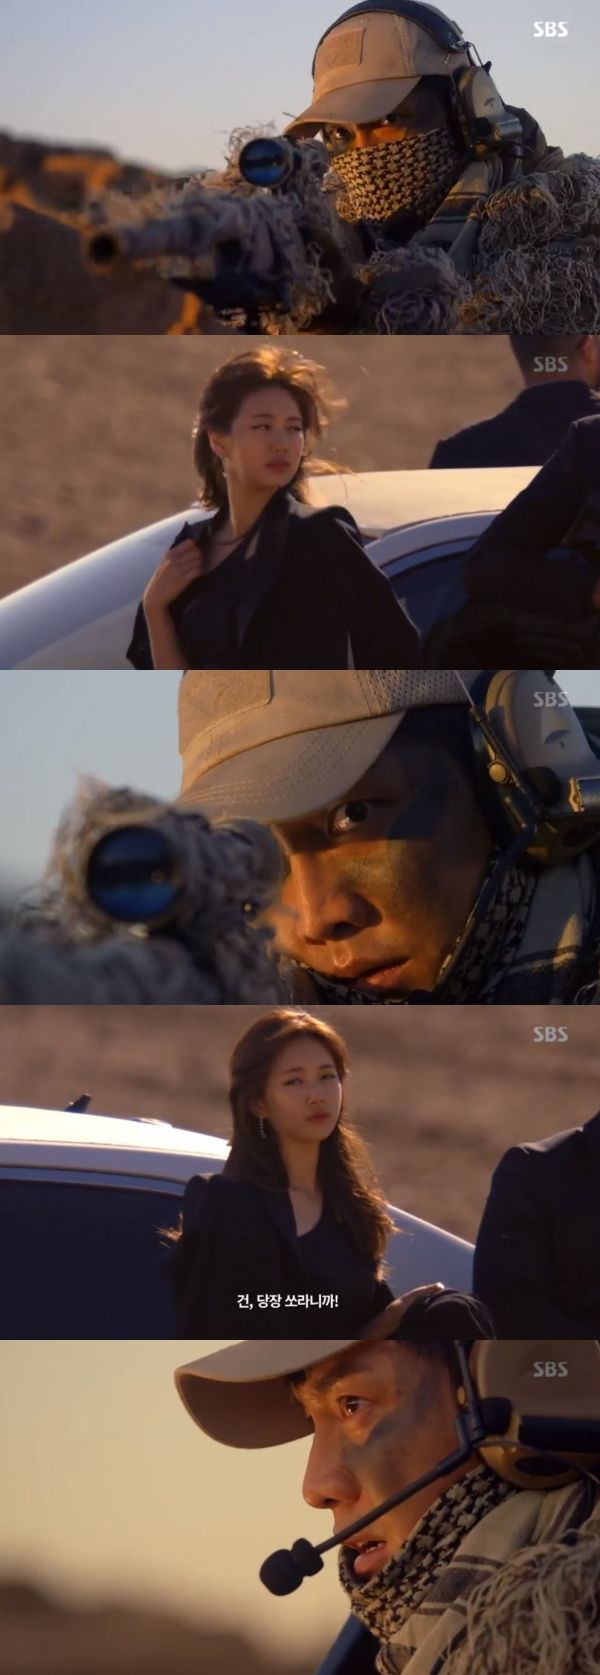 Lee Seung-gi, who became a secret agent, faced lobbyist Bae Suzy.In the 16th episode of SBS gilt drama Vagabond (playwright Jang Young-chul, director Yoo In-sik), which was broadcast on the 23rd, Lee Seung-gi, who became a secret agent for the Black Sun, was ordered to Assassination by Bae Suzy.After hearing news of Cha Dal-guns death on the show, Goh Hae-ri headed to Kang Ju-cheol (Lee Gi-young). Kang Ju-cheol added, As soon as he took over as acting president, Hong Soon-jo revealed his true colors.I was killed, said Gohari. Is it possible for a person who risked his life to set up a court in Kim Woo-ki to kill the victim and commit suicide before the appeal?So, Gohari headed to prison to reveal Samaels identity. Gohari, who was imprisoned according to Ki Tae-woongs design, found Jessica Lee (Moon Jeong-hee).Jessica Lee named Prince Edward Island Park (Lee Kyung-young) as Samael, and Gohari wept, saying, Prince Edward Island Park killed him.In front of Prince Edward Island Park, who visited, the confession was hidden. The confession was told to Prince Edward Island Park, Chadalgan, Jessica killed him.Samael, Black Sun, secret mercenary Mark, is all fiction, he said.Turning around, Prince Edward Island Park said of the confession, It shows only what you want to see, so its called a show.Prince Edward Island Park went to Jessica Lee and said, Why do not you tell me to help? I can do the United States of America repatriation.But Jessica Lee turned around, saying, I hate you, I dont open my hands.Gohari and Jessica Lee, who were released from prison, held hands; Jessica Lee said, Lets go into United States of America together for six months.Ill make you the best lobbyist, Gohari said, and accepted.The trail was hidden and the Chadalgan was tracking the Black Sun.Chadalgan visited Jungkook to hire Lily (Park Ain), saying, It must be Prince Edward Island SS.I need money, Im going into a tiger oyster to catch a tiger, Chadalgan told the Jungkook ticket, which helps me because I dont think Ill die even if Im hit by a lightning strike.I think my life is collateral, but I will not lose it. Chadalgan headed to Jerome (Jew Tae-oh) as a Black Sun secret agent, who used biochemical weapons to ask, What is the tissue identity? and Jerome said, Its a secret tissue Axis.It is an international financial organization. However, Cha Dal-gun broke the antidote and blew up the scene and took revenge from his nephew.Since then, Chadalgan has been waiting for the target under the Assassination order, but the target that appeared was the confession that became a lobbyist.Chadalgan refused the order, and shot a colleague who tried to remove the confession.